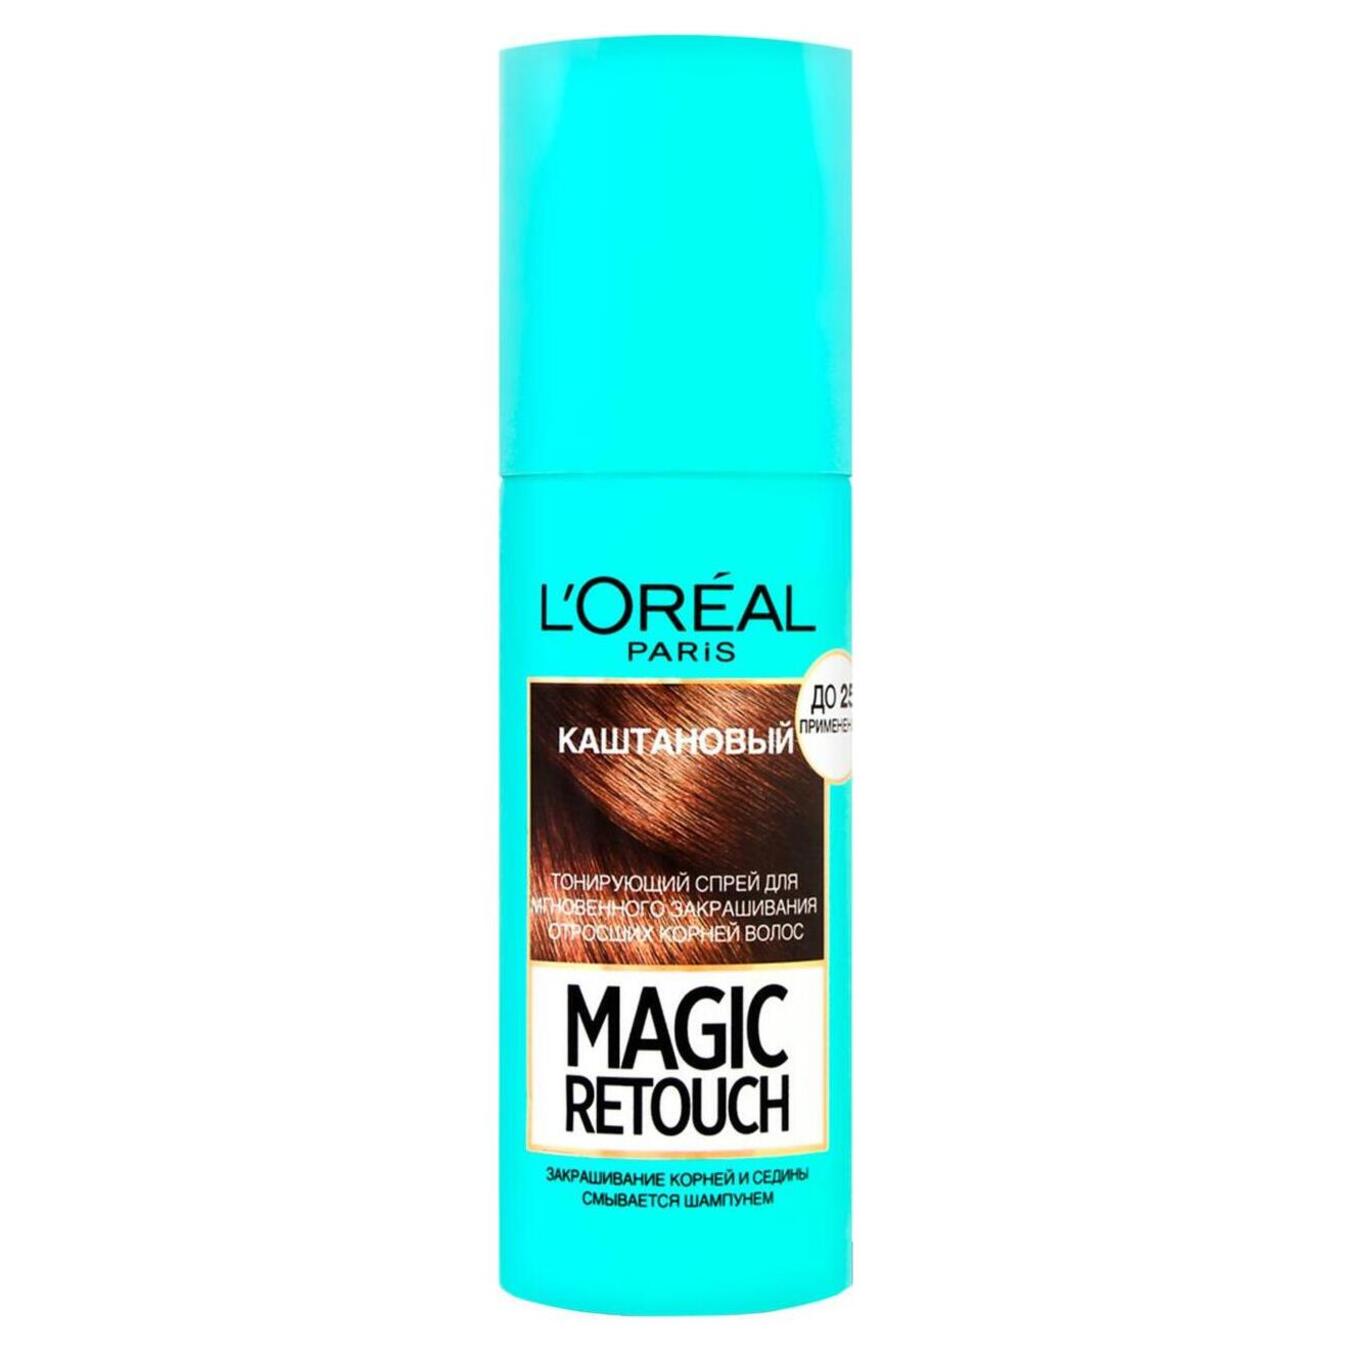 Tinting spray for instant masking of regrown hair roots L'oreal Magoc Retouch chestnut 75ml